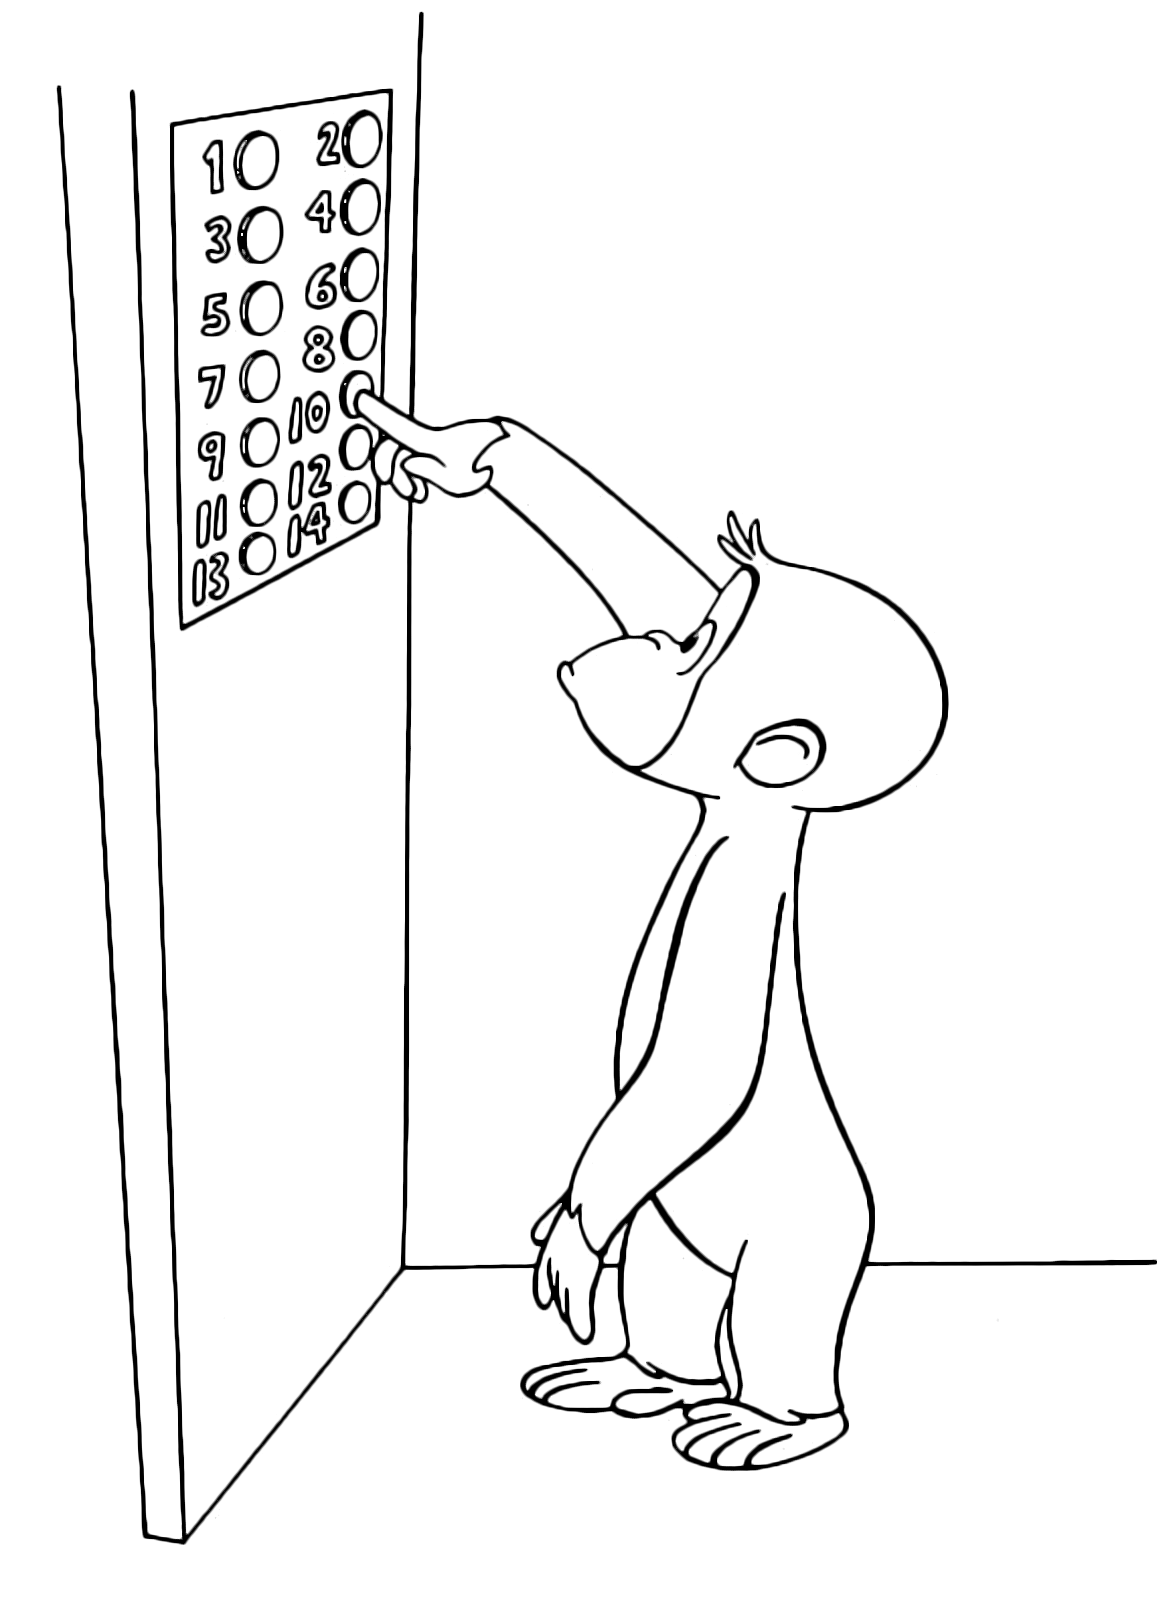 Curious George - George called the elevator